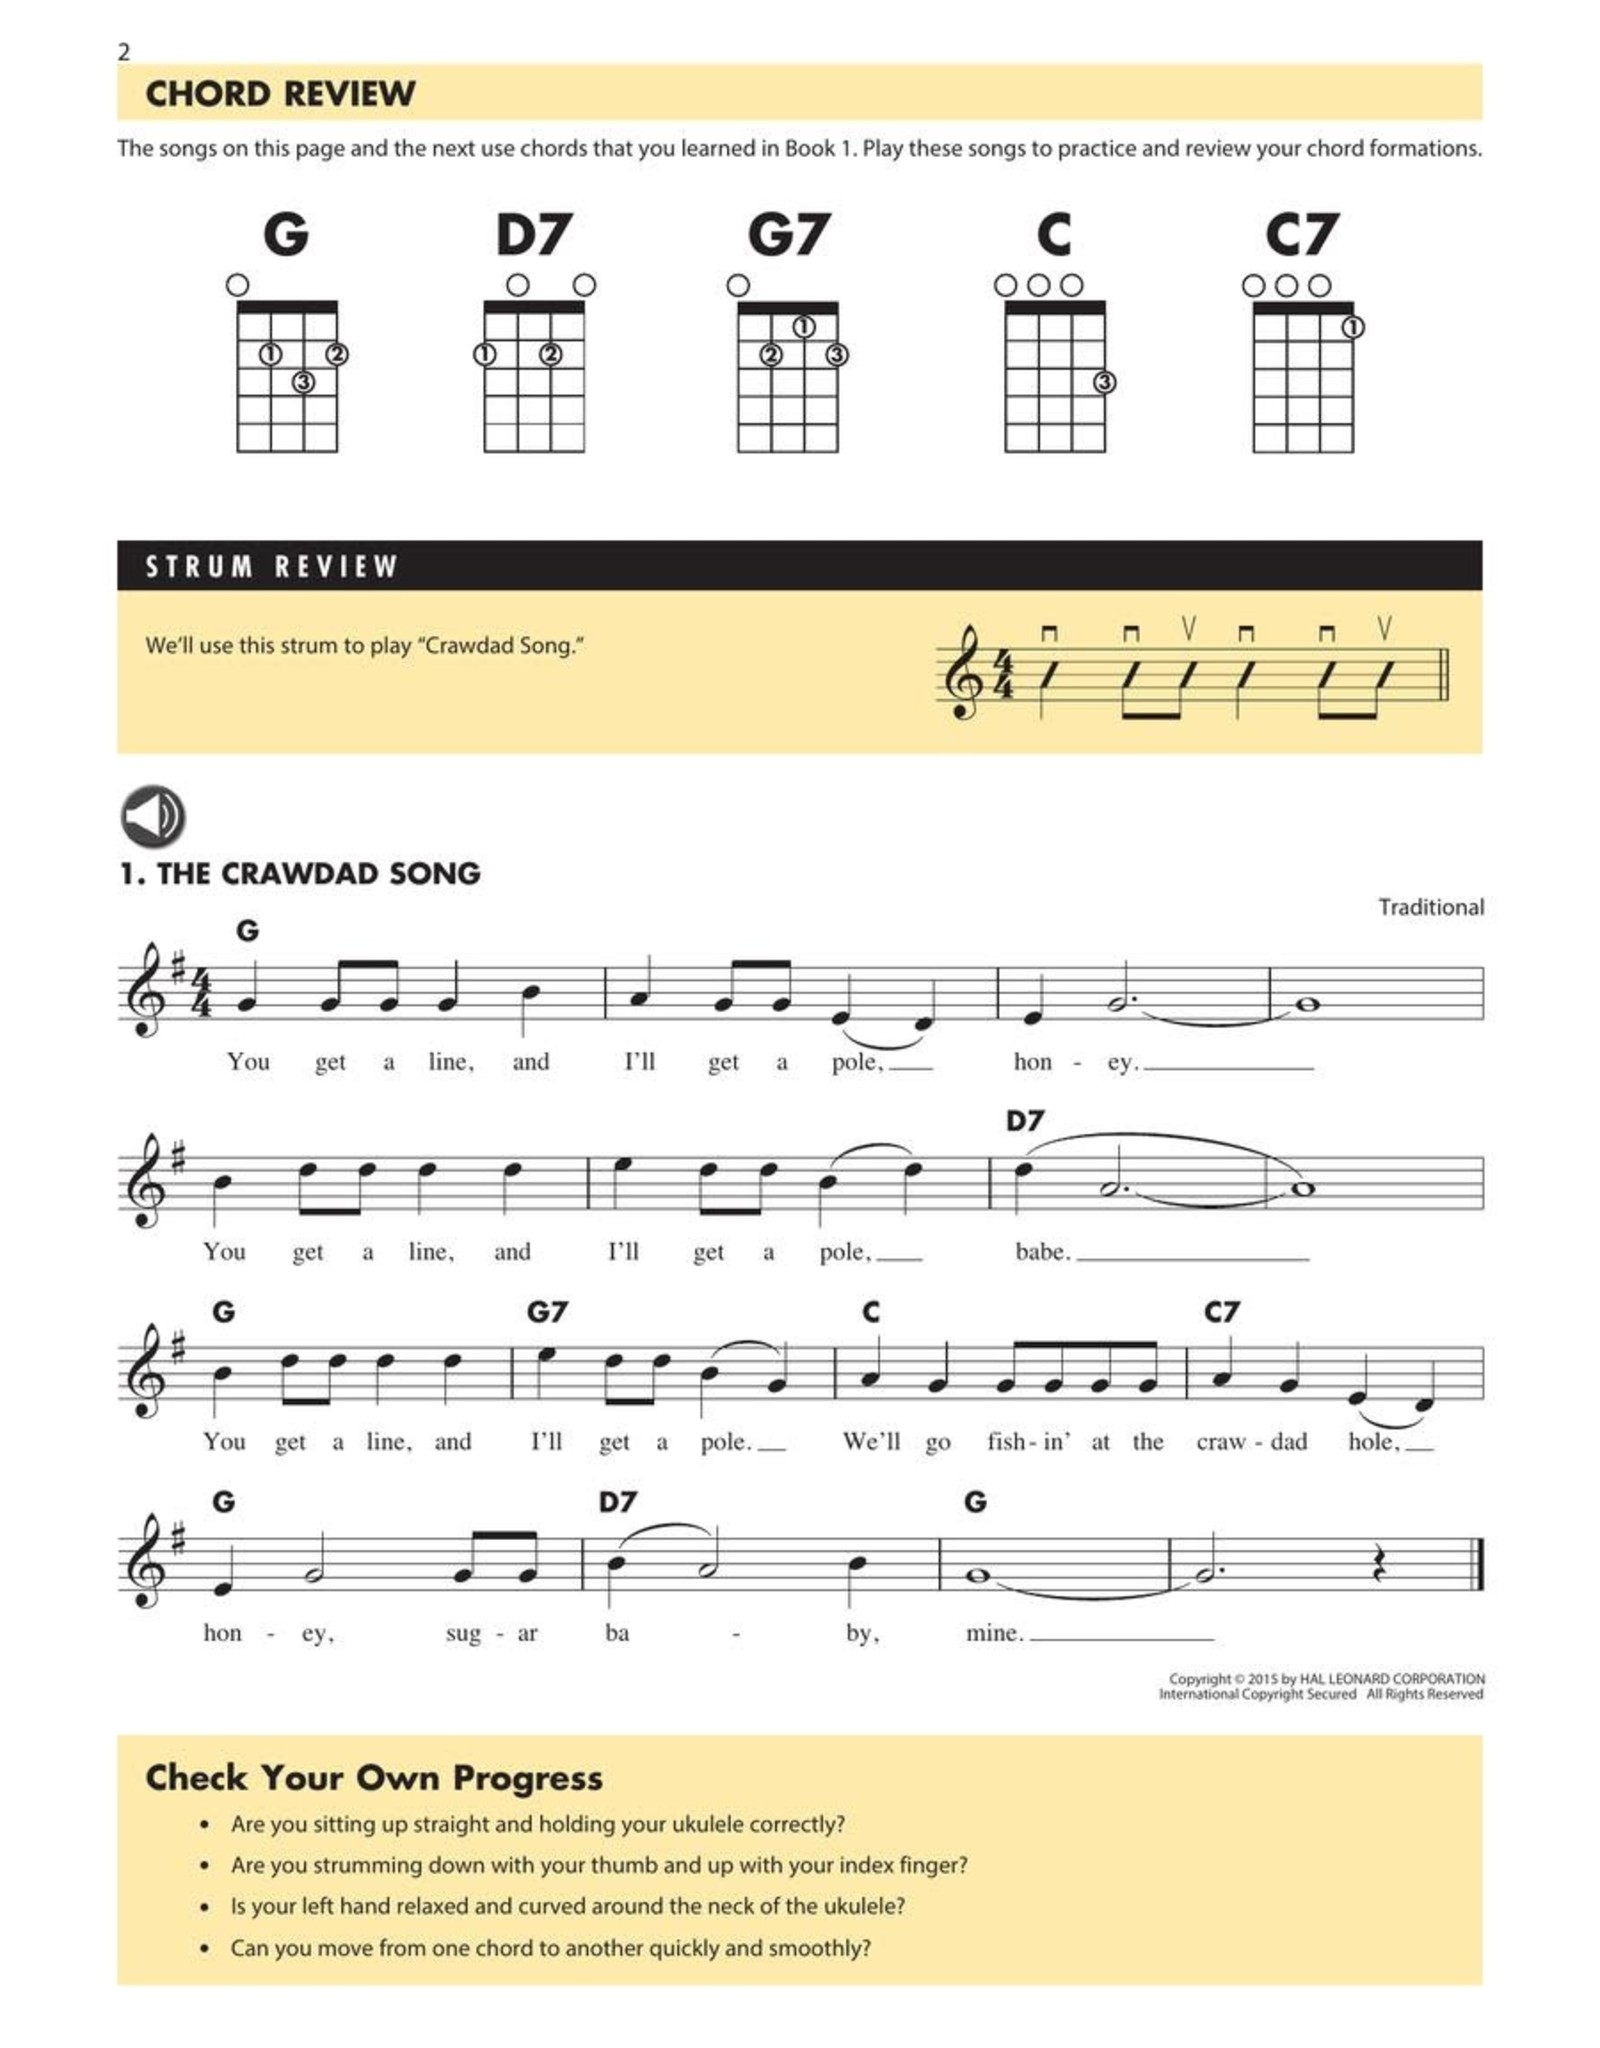 Hal Leonard Essential Elements for Ukulele - Book 2 with Audio Access